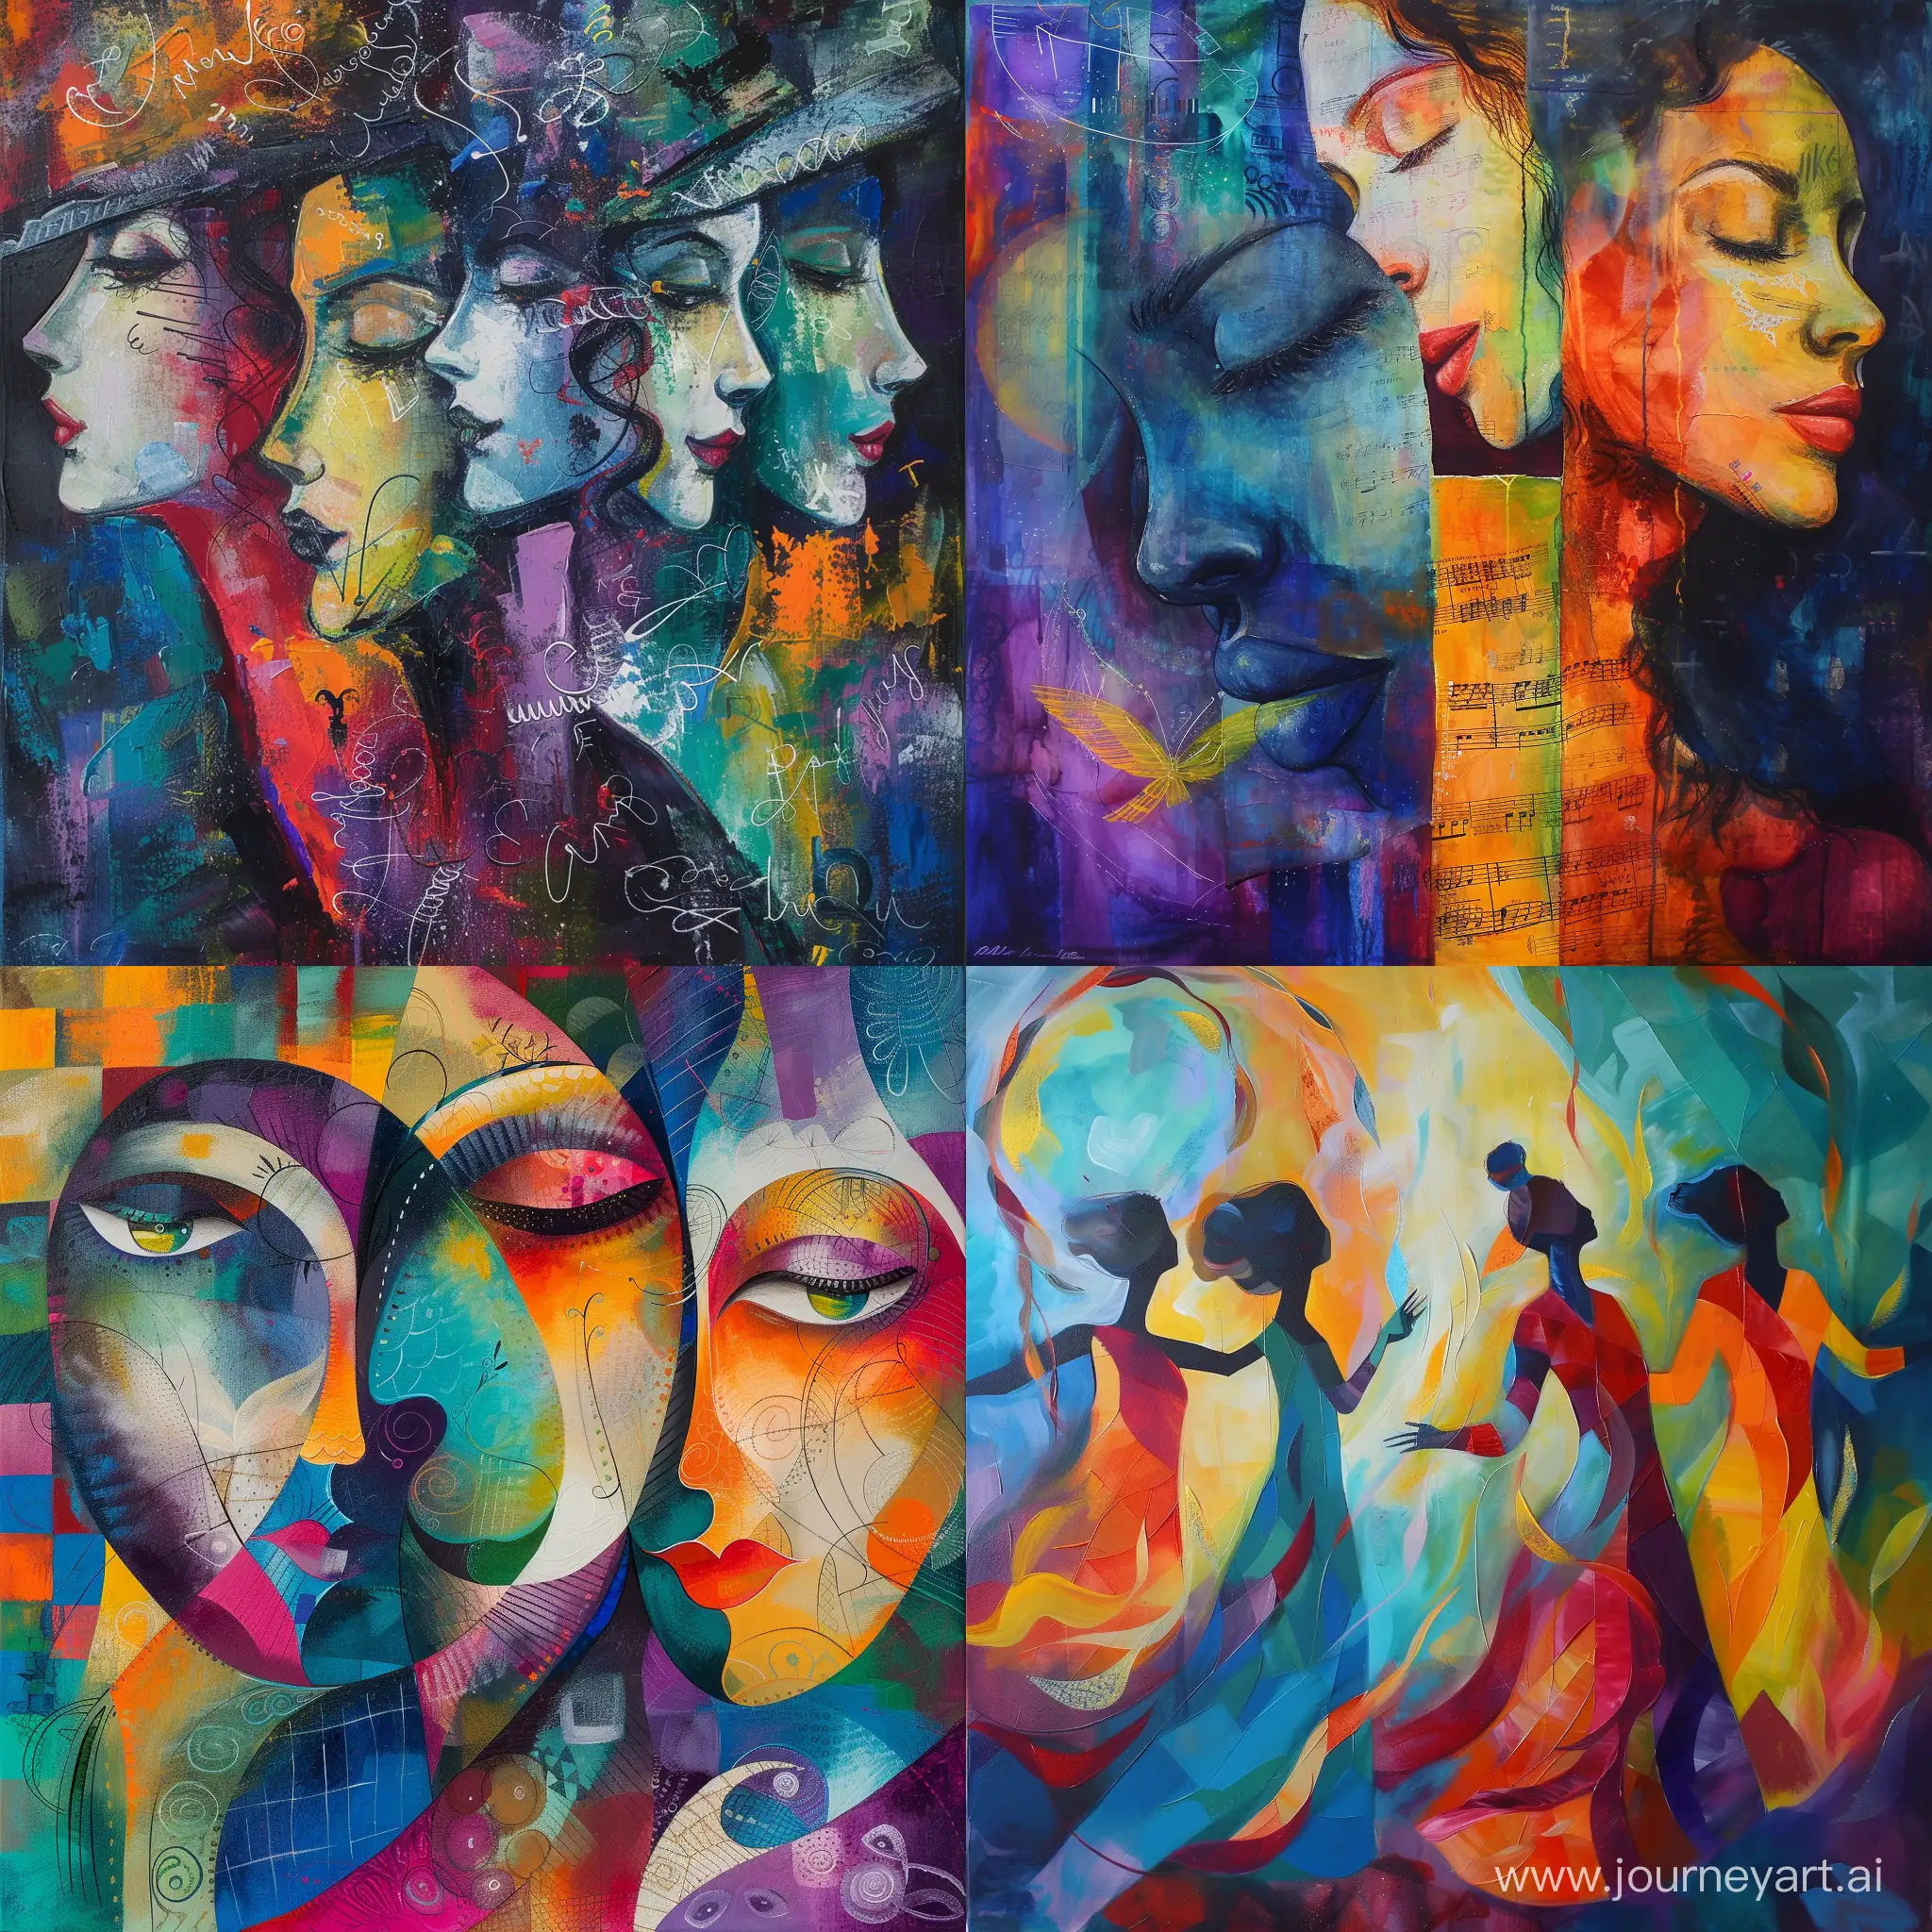 abstract painting on women and their creativity expressed with words, songs and sounds